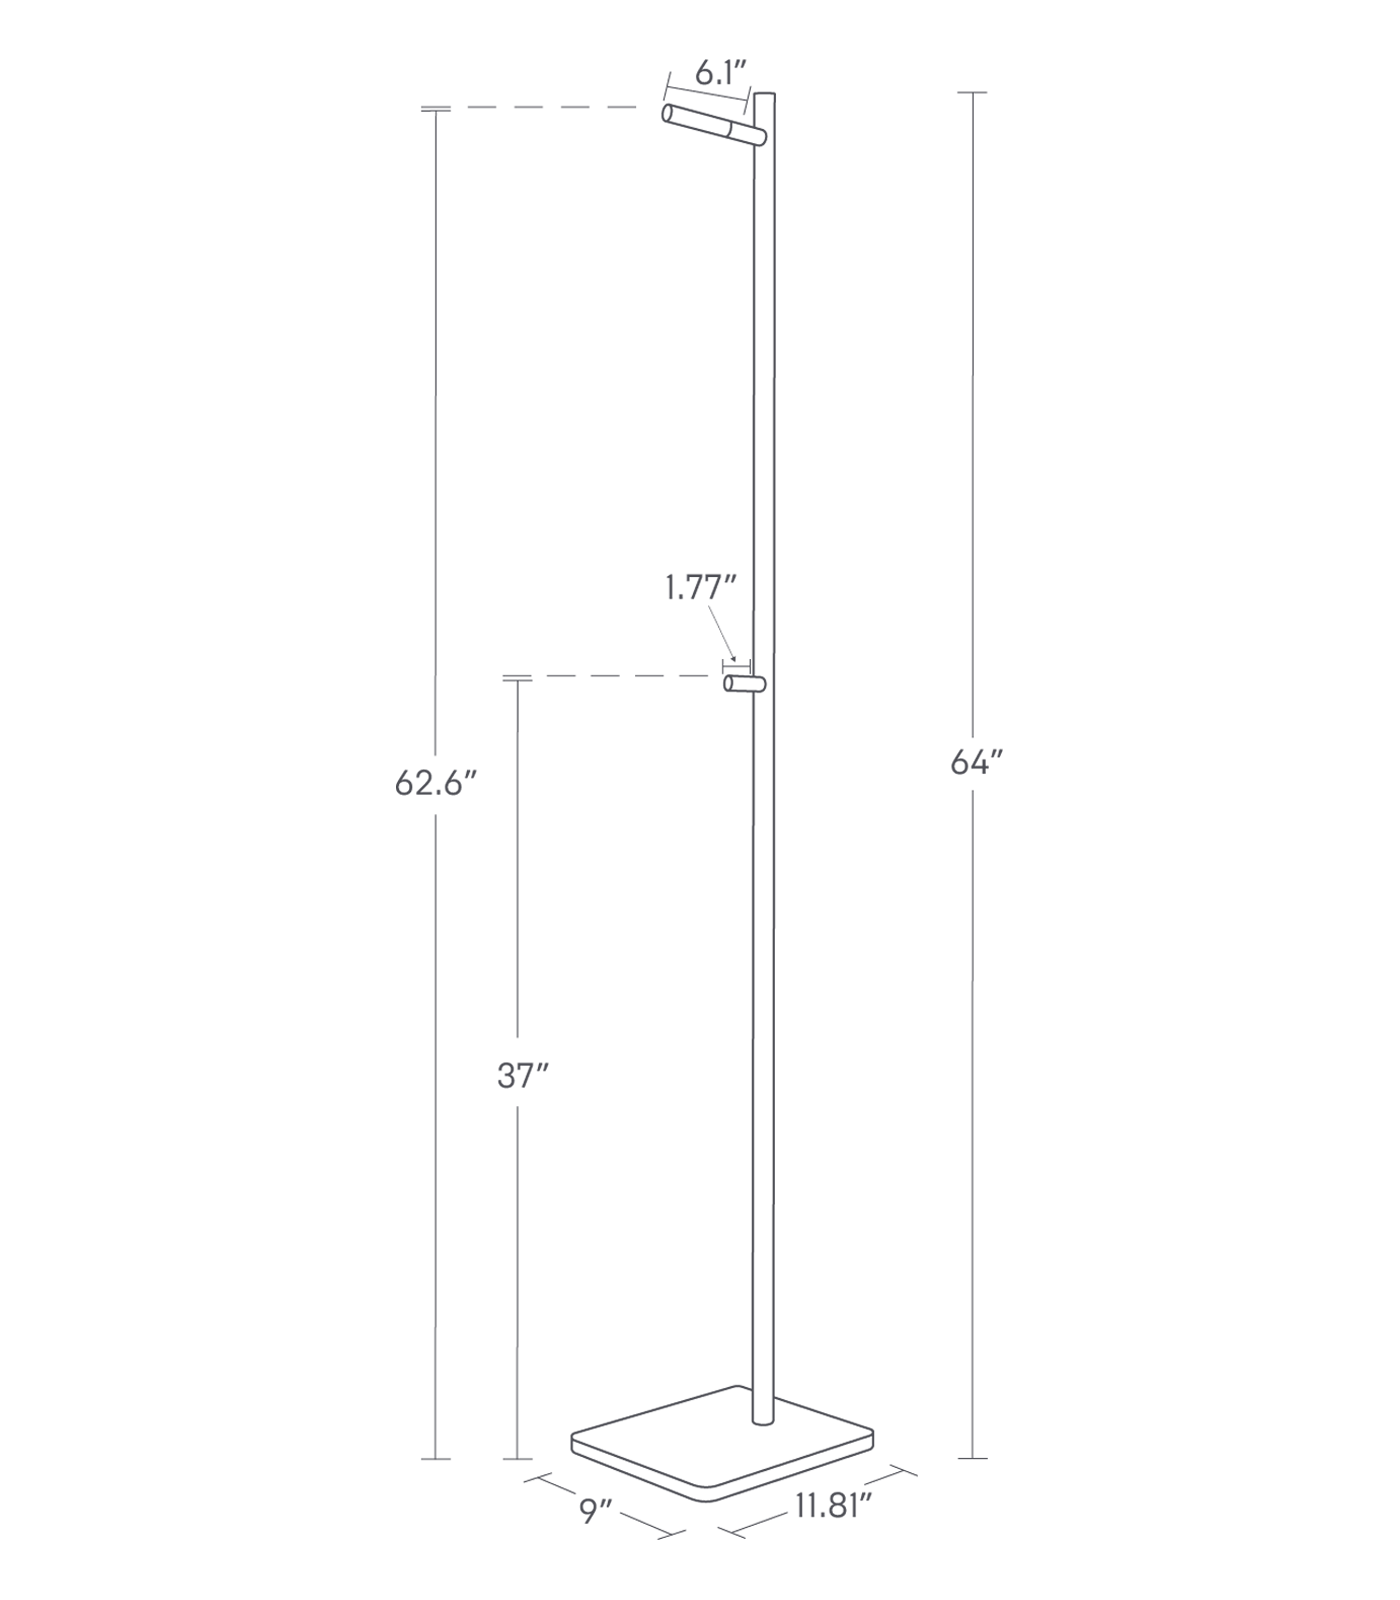 TOWER Coat Rack. Overall height 63.98 inches. Base 11.81 inches in length, 9 inches in width. Highest peg 62.6 inches from base, 6.1 inches in length. Lowest peg 37 inches from base, 1.77 inches in length.